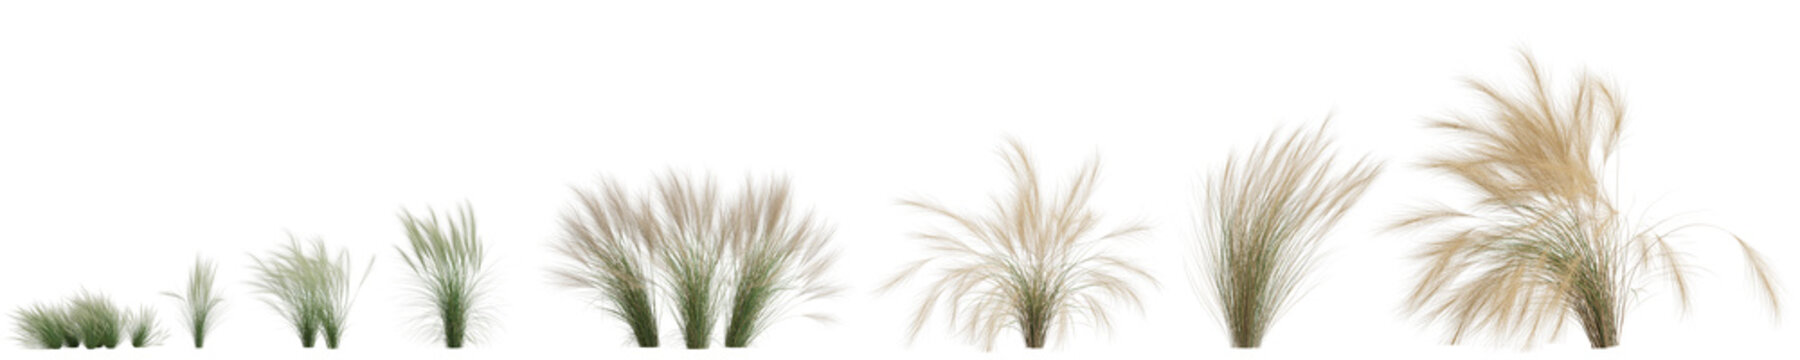 3d illustration of set nassella tenuissima grass isolated on transparent background